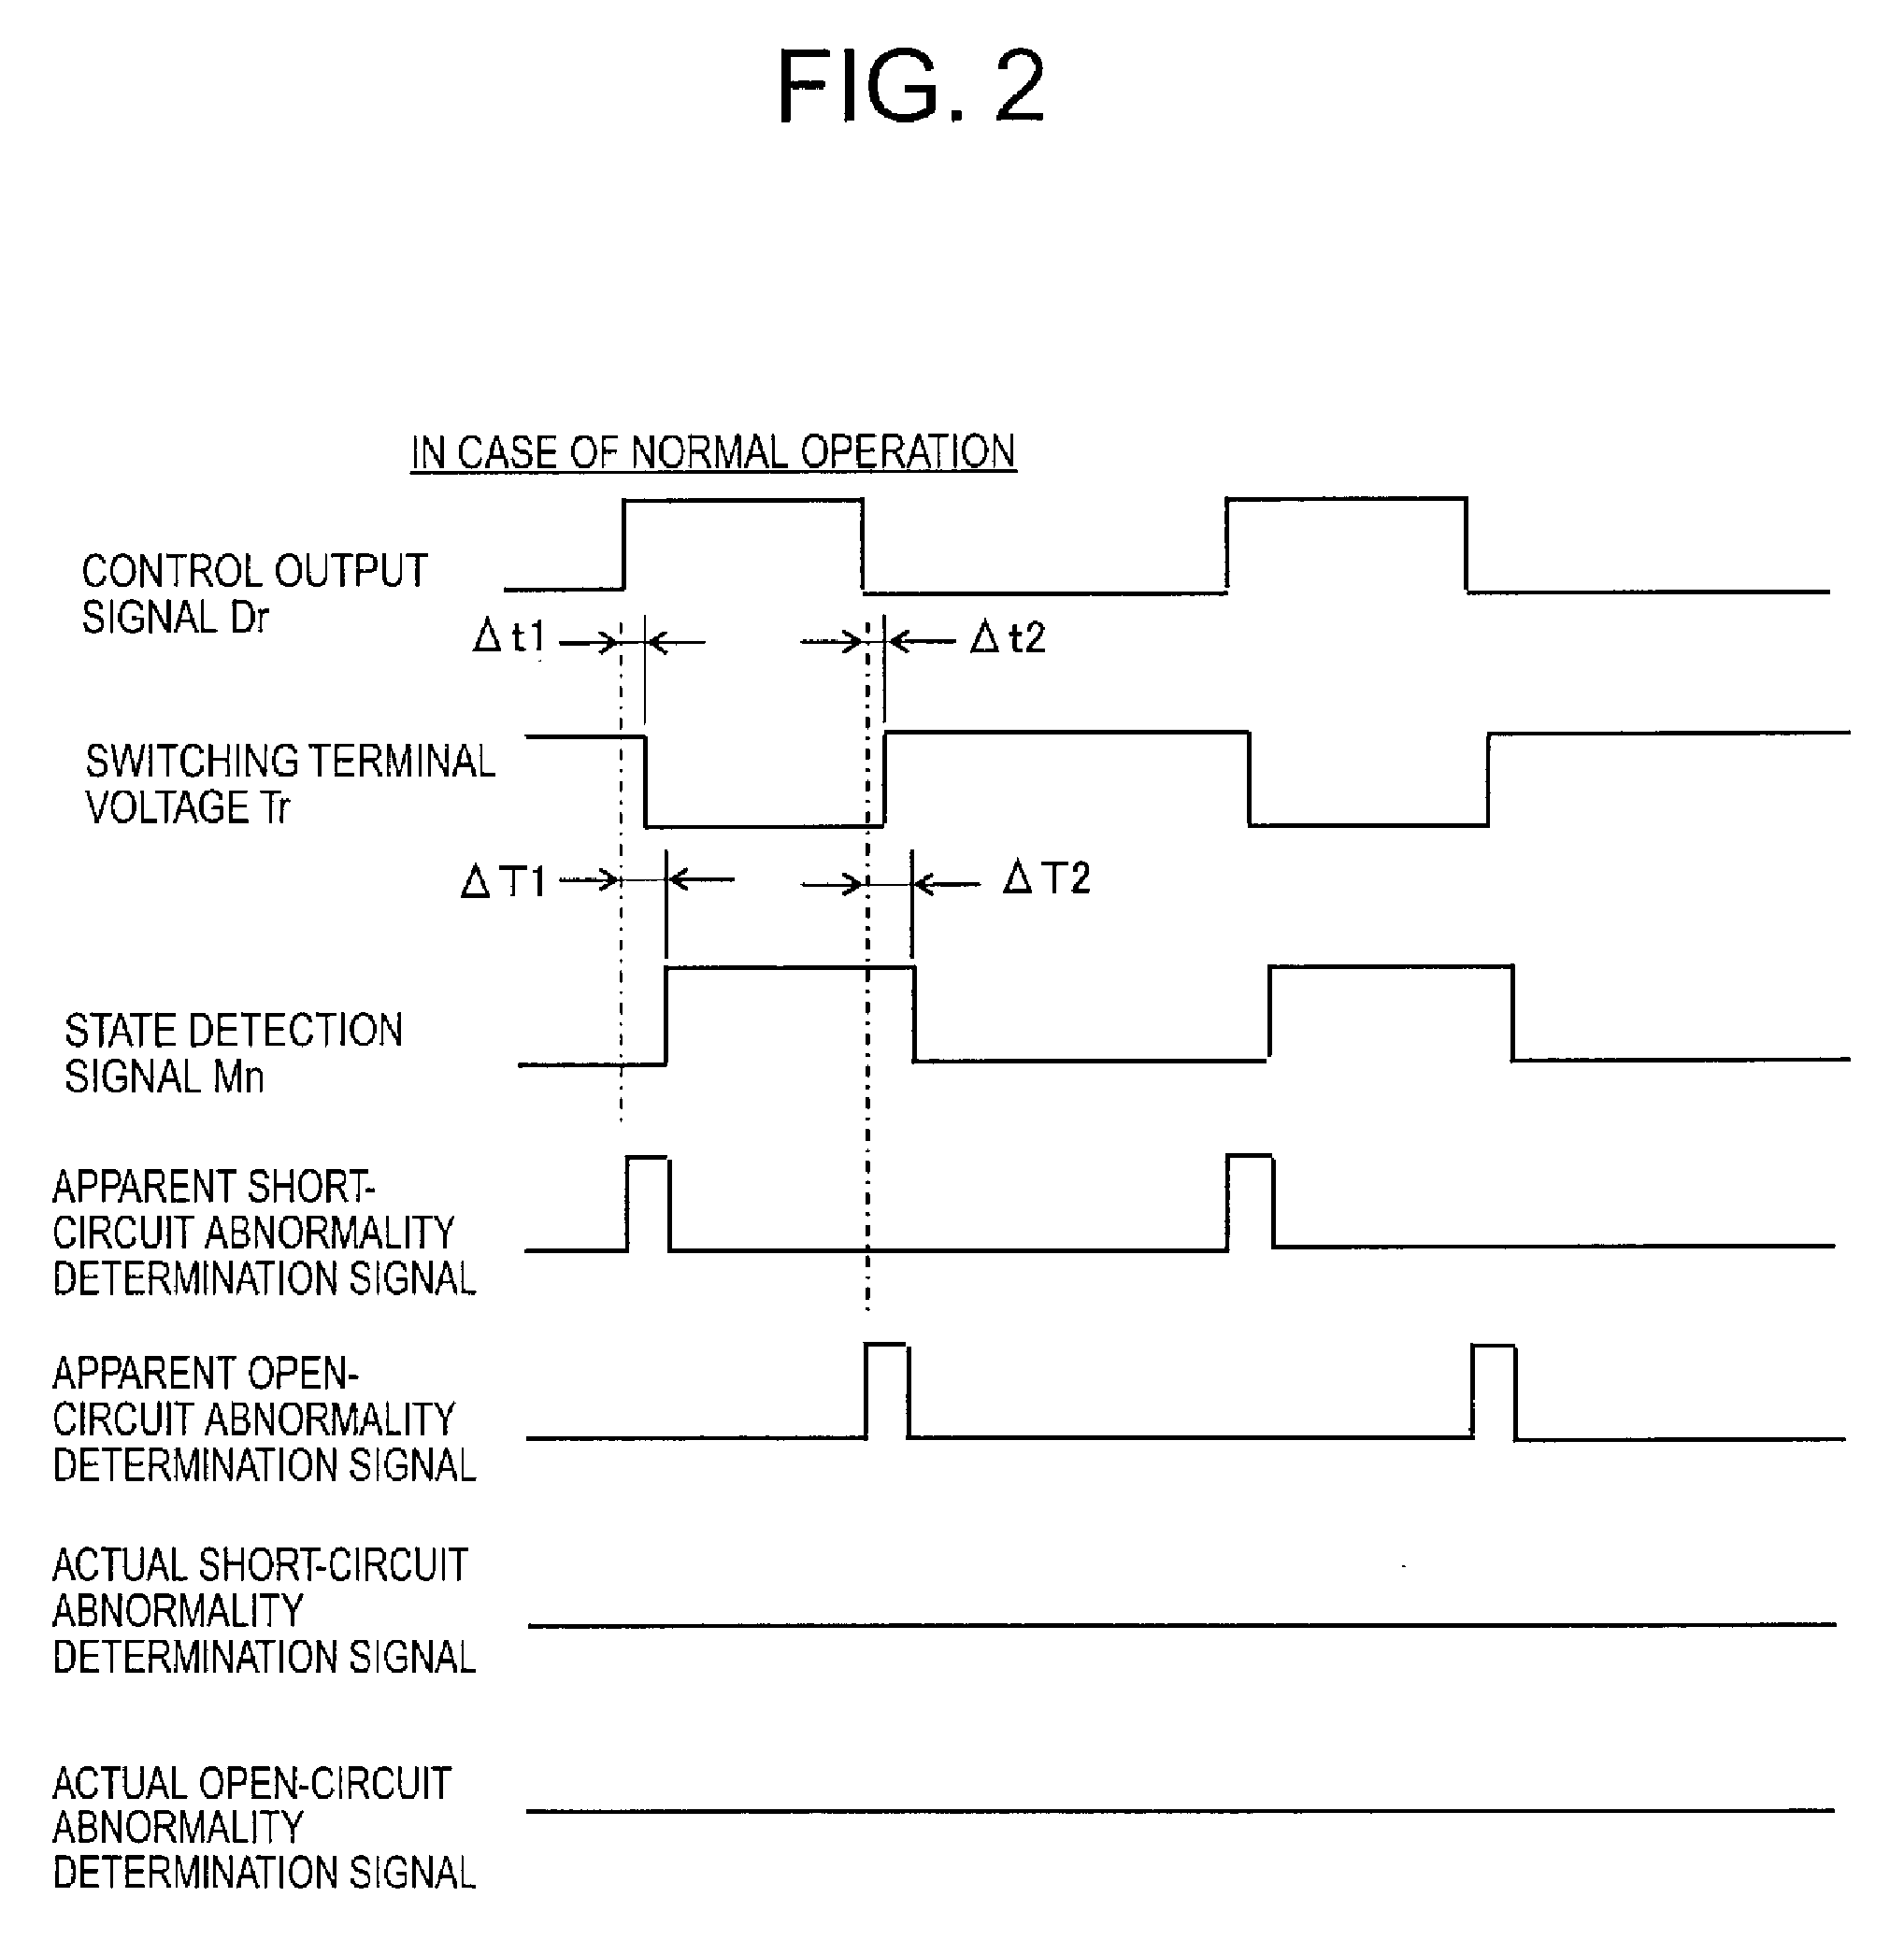 Abnormality detection apparatus for a power feed circuit